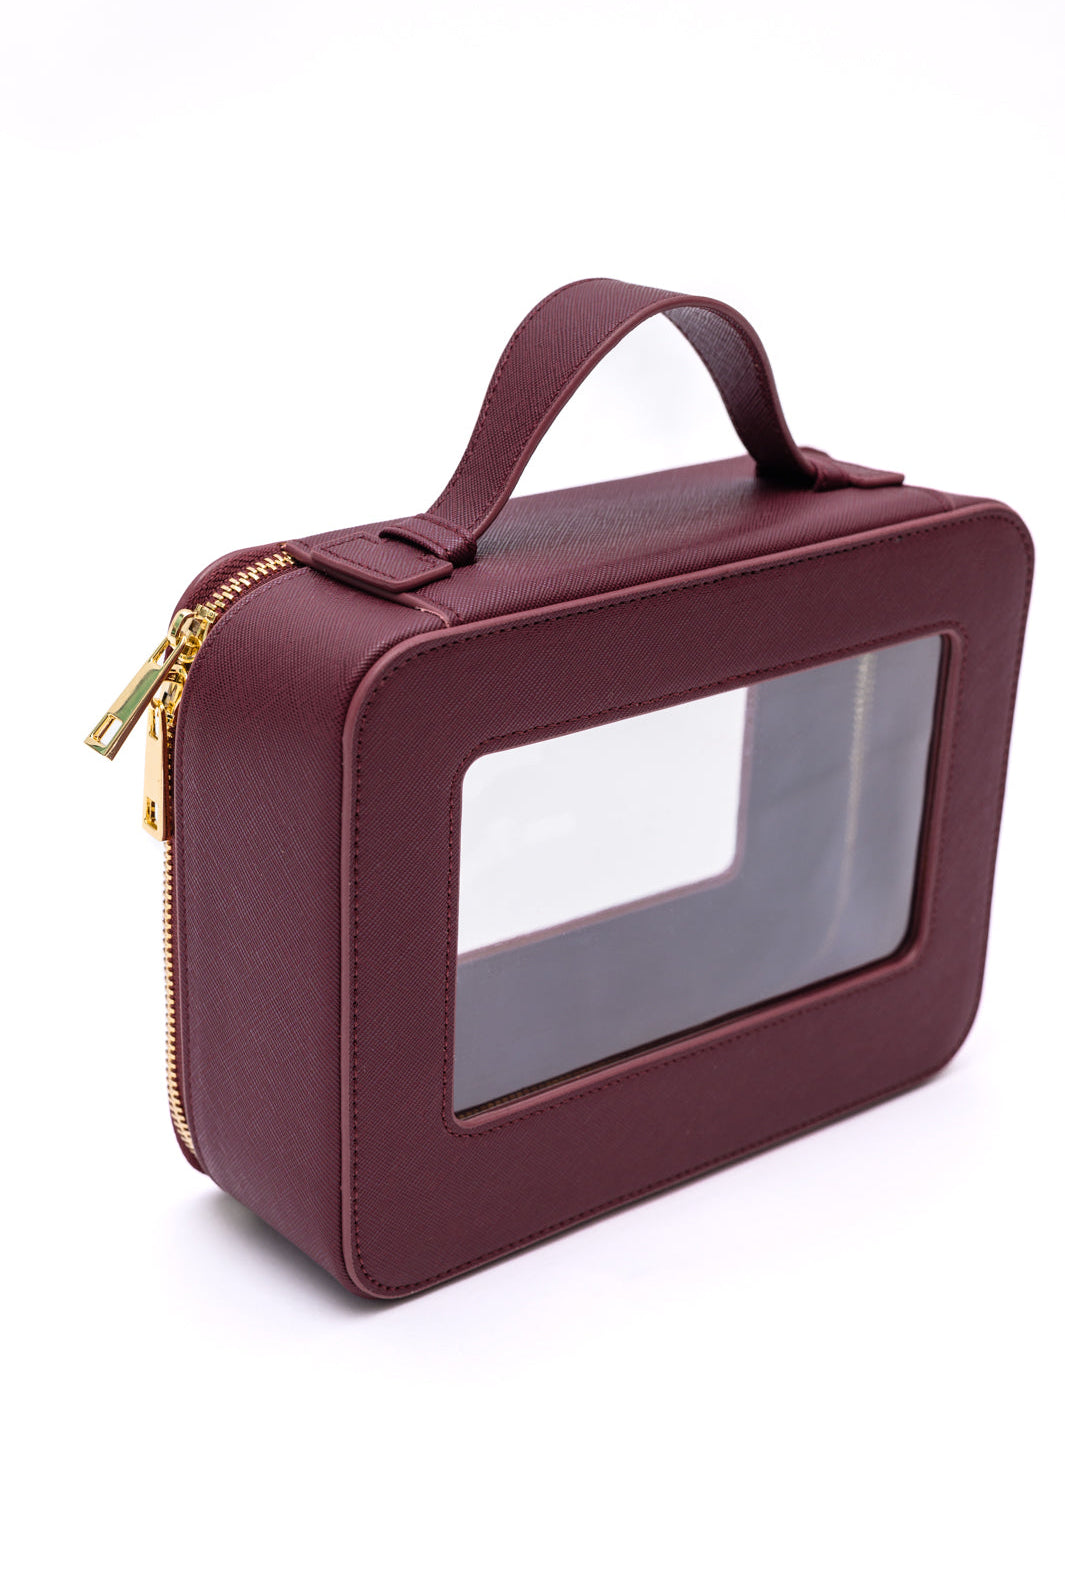 PU Leather Travel Cosmetic Case in Wine-Womens-Ave Shops-Urban Threadz Boutique, Women's Fashion Boutique in Saugatuck, MI